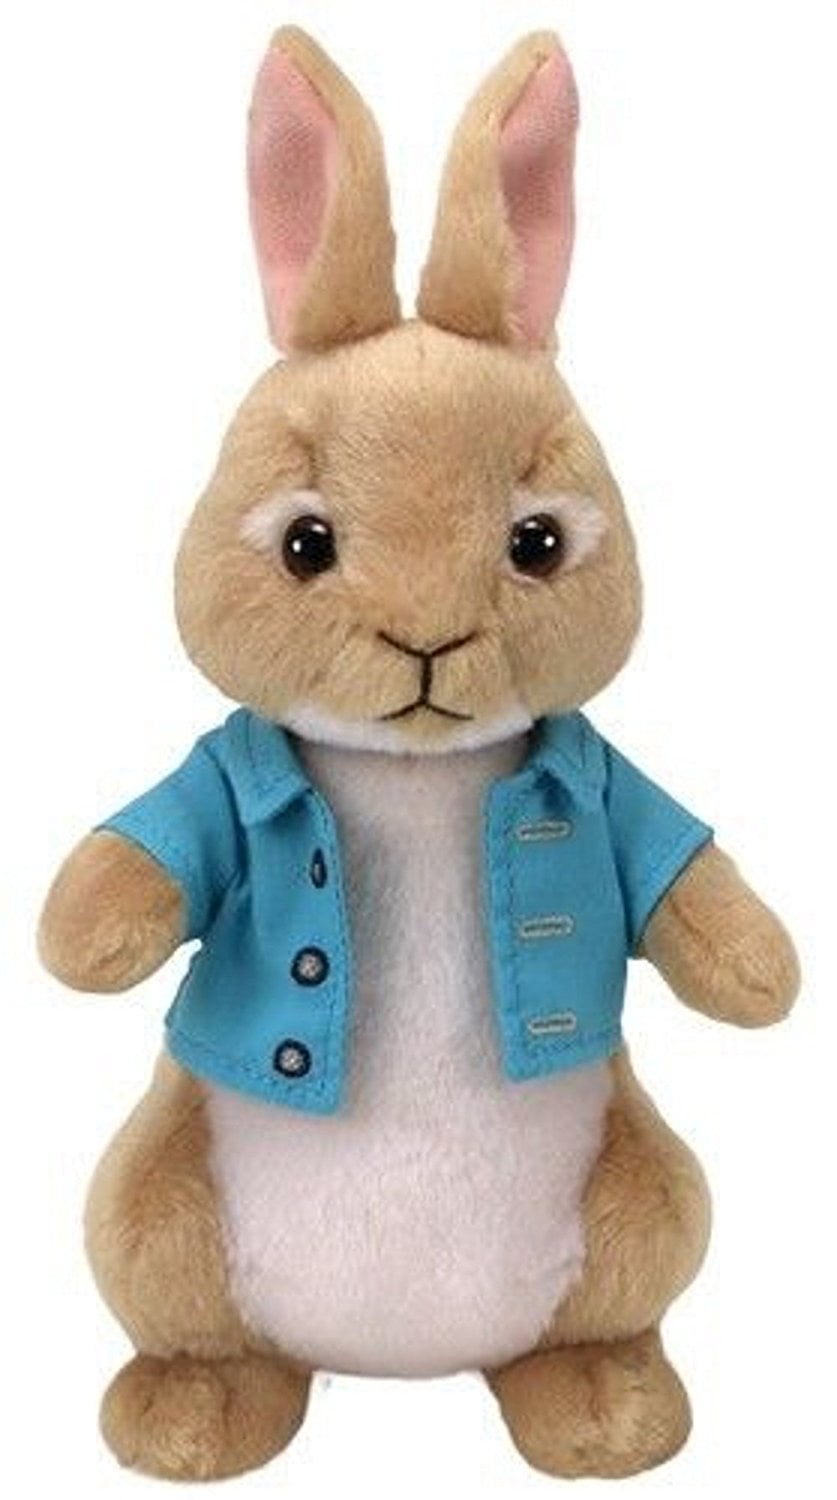 Official TY Peter Rabbit Beanie Babies Cotton Tail Plush Soft Toy 8.5" 